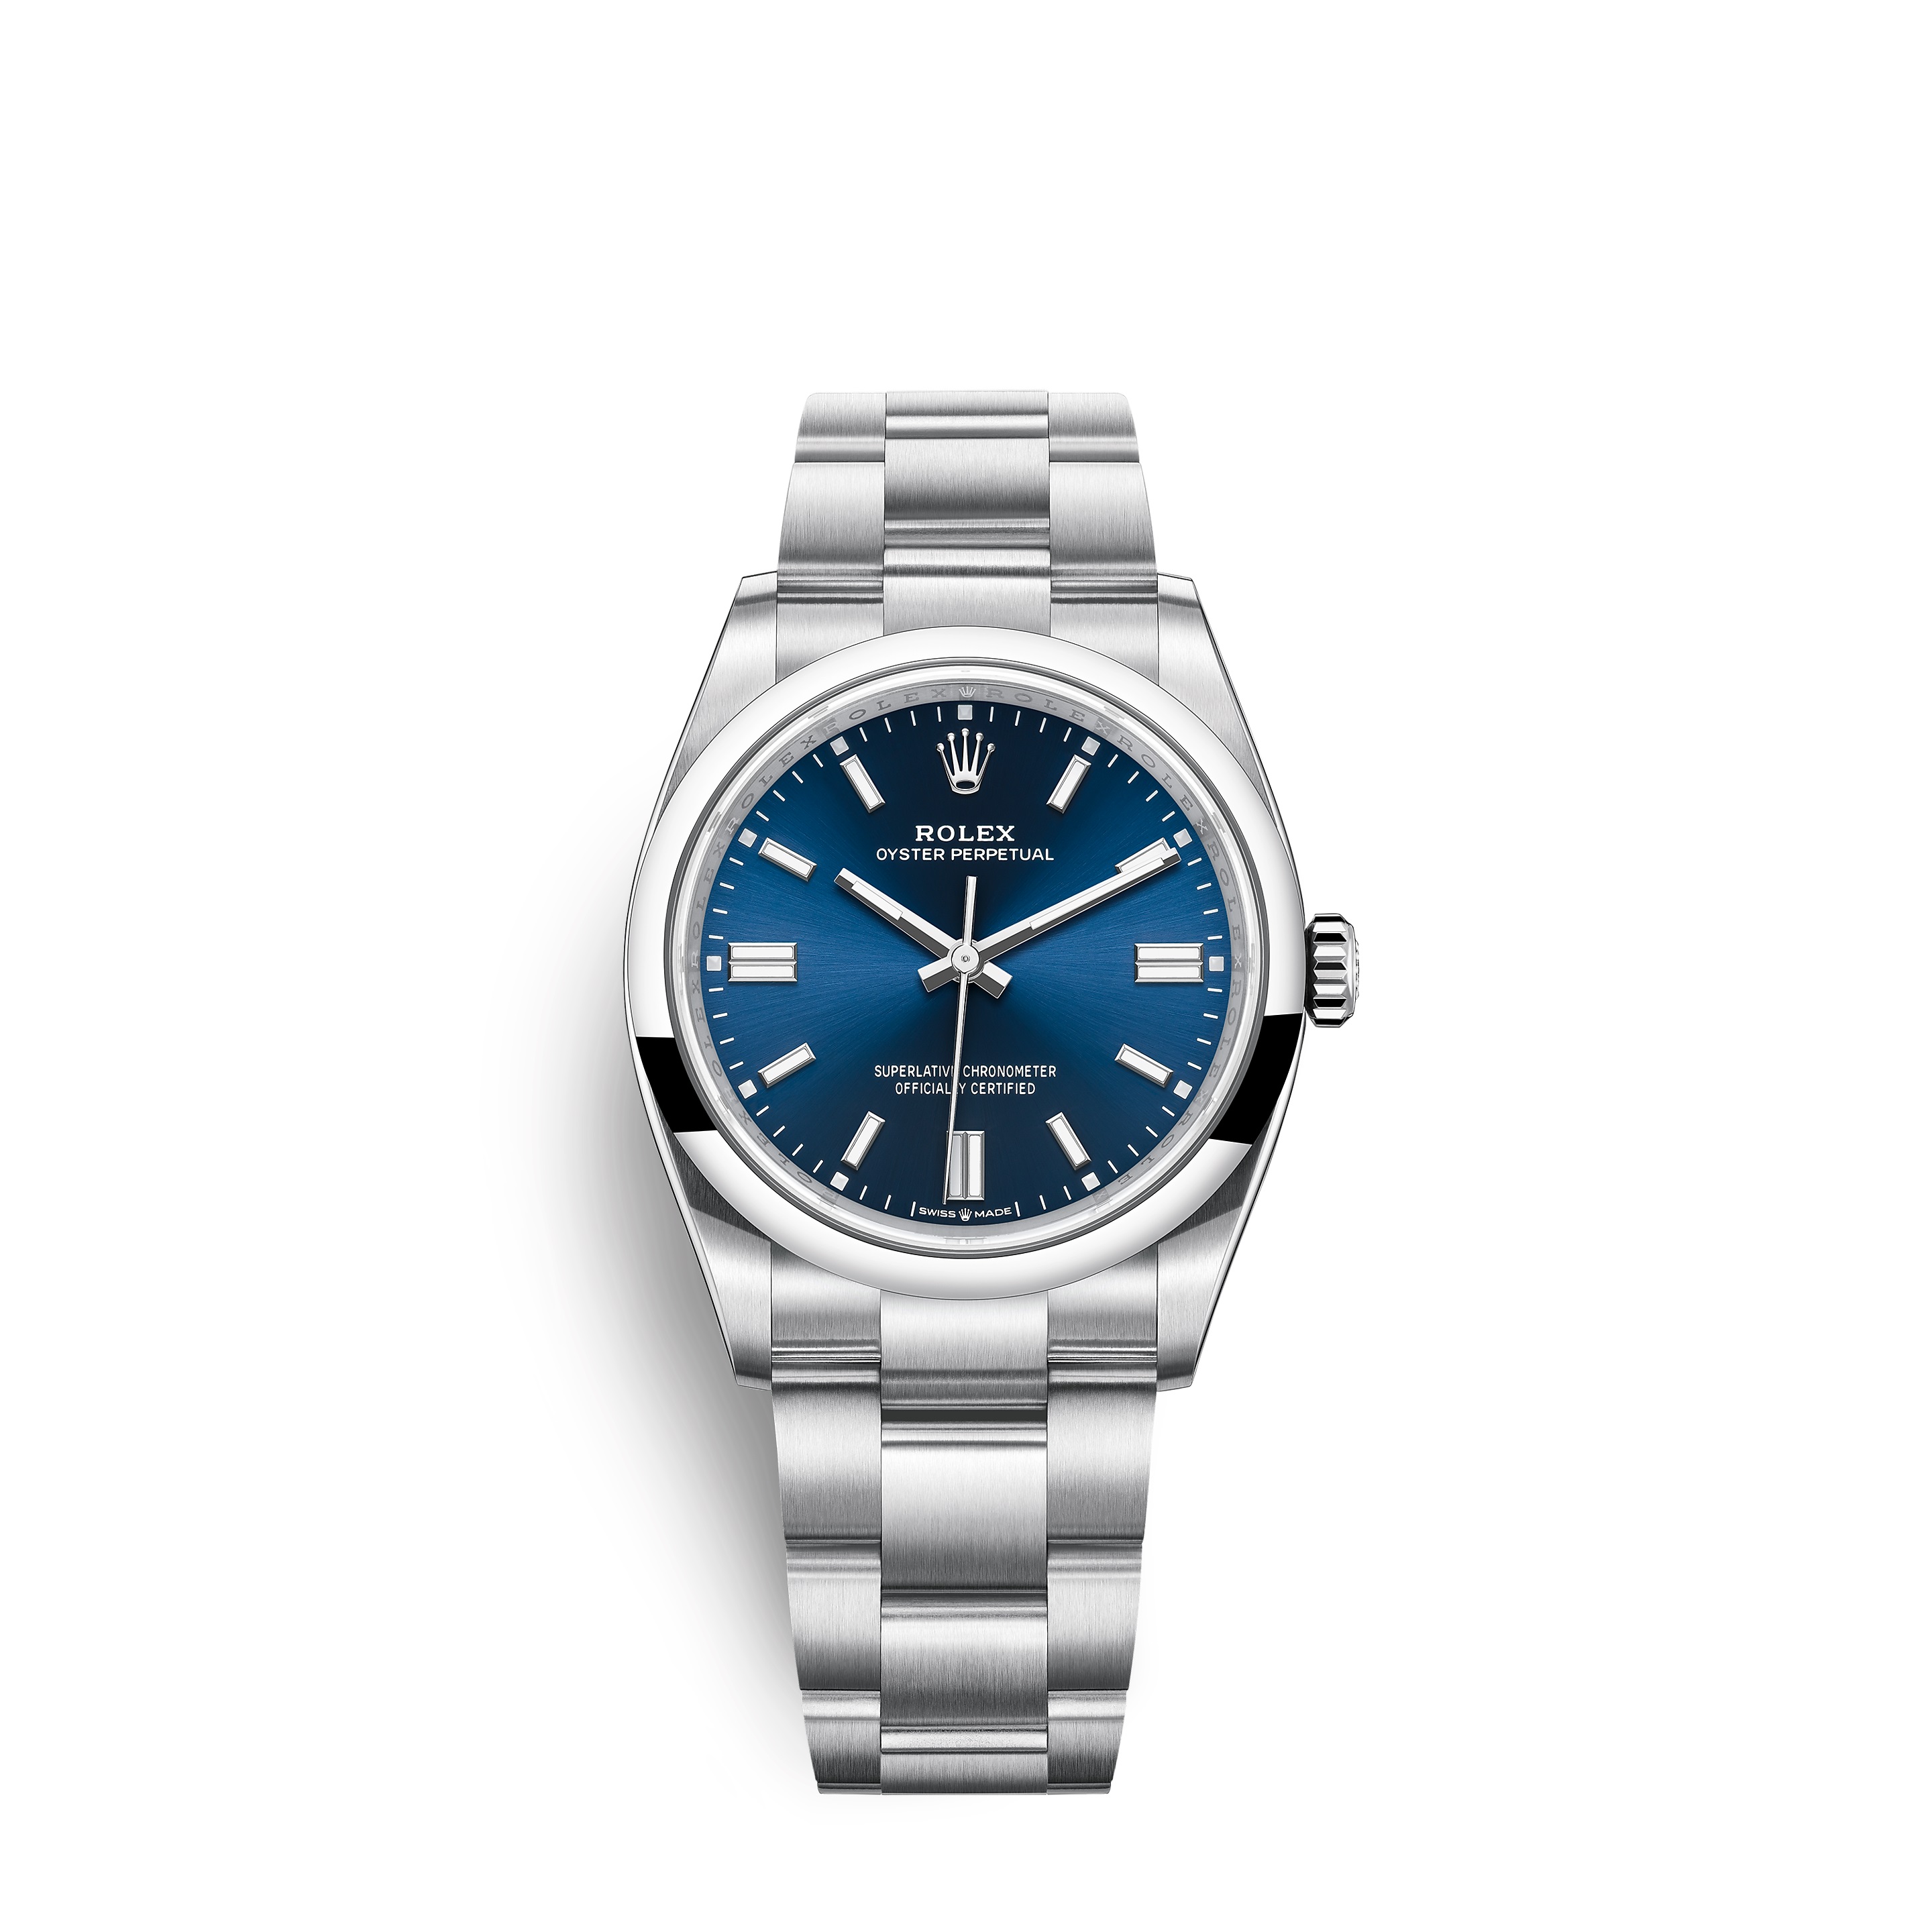 Oyster Perpetual 36 126000 Stainless Steel Watch (Bright Blue)